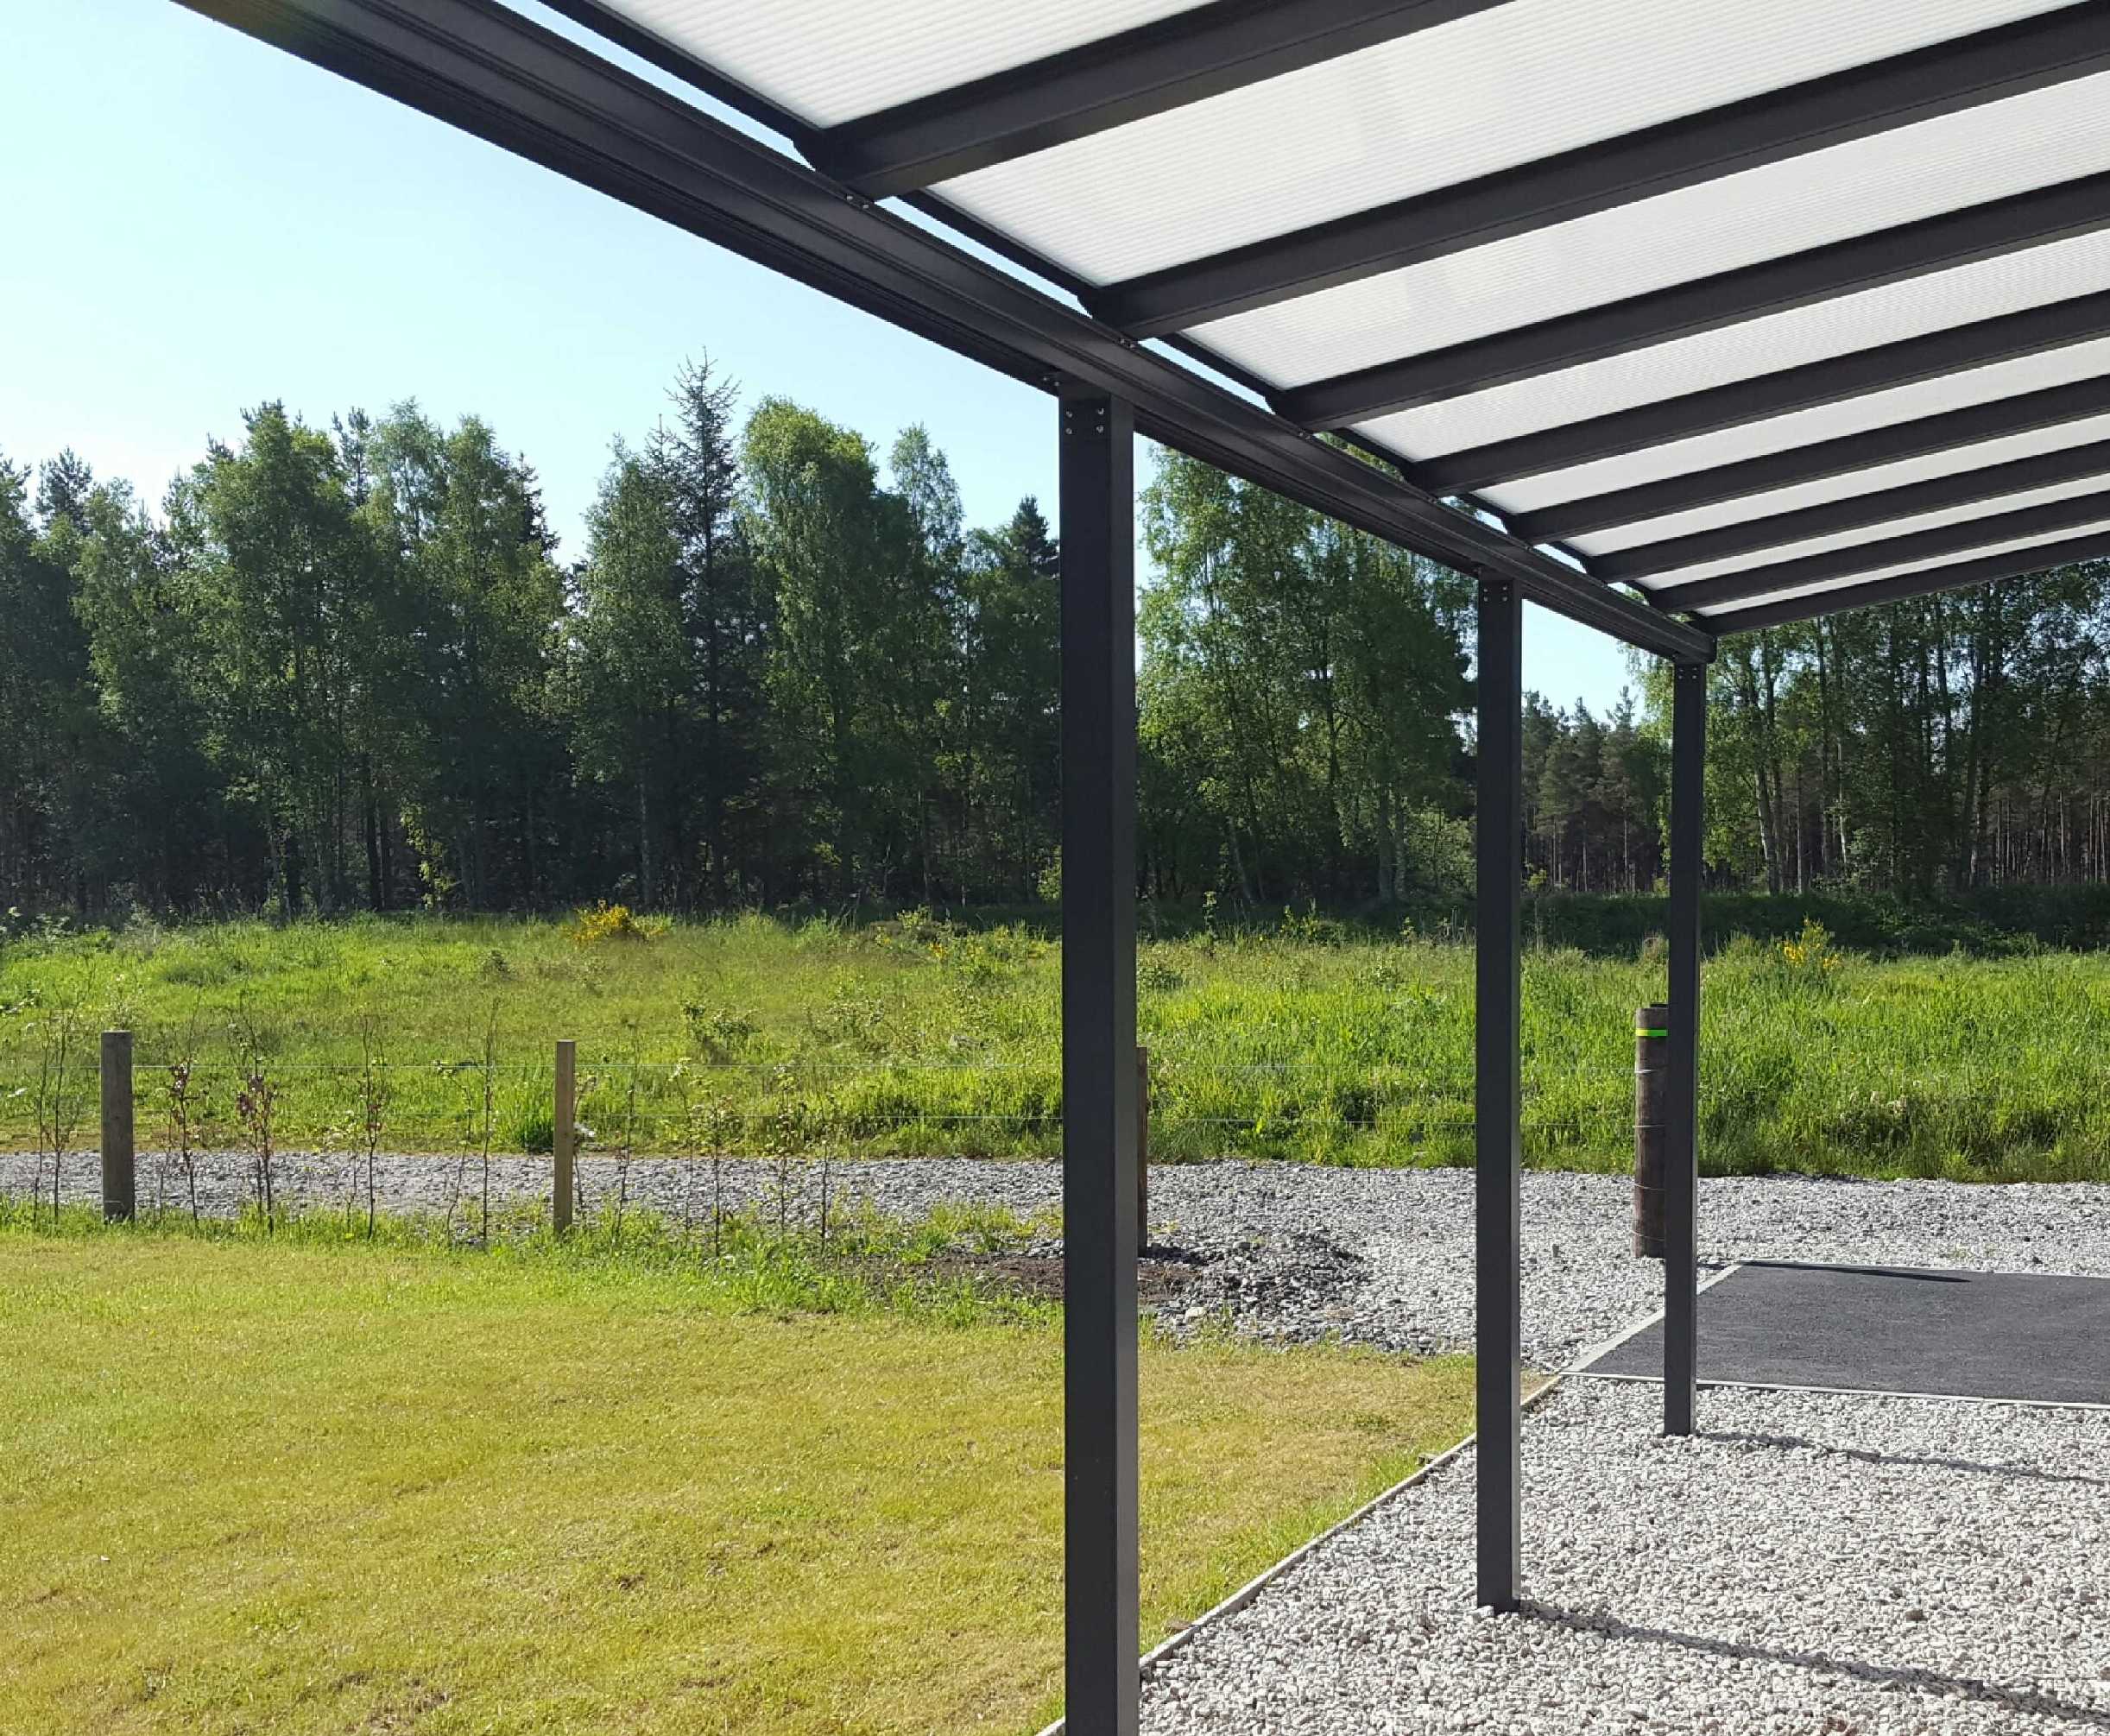 Omega Smart Lean-To Canopy, Anthracite Grey, 6mm Glass Clear Plate Polycarbonate Glazing - 9.1m (W) x 2.5m (P), (5) Supporting Posts